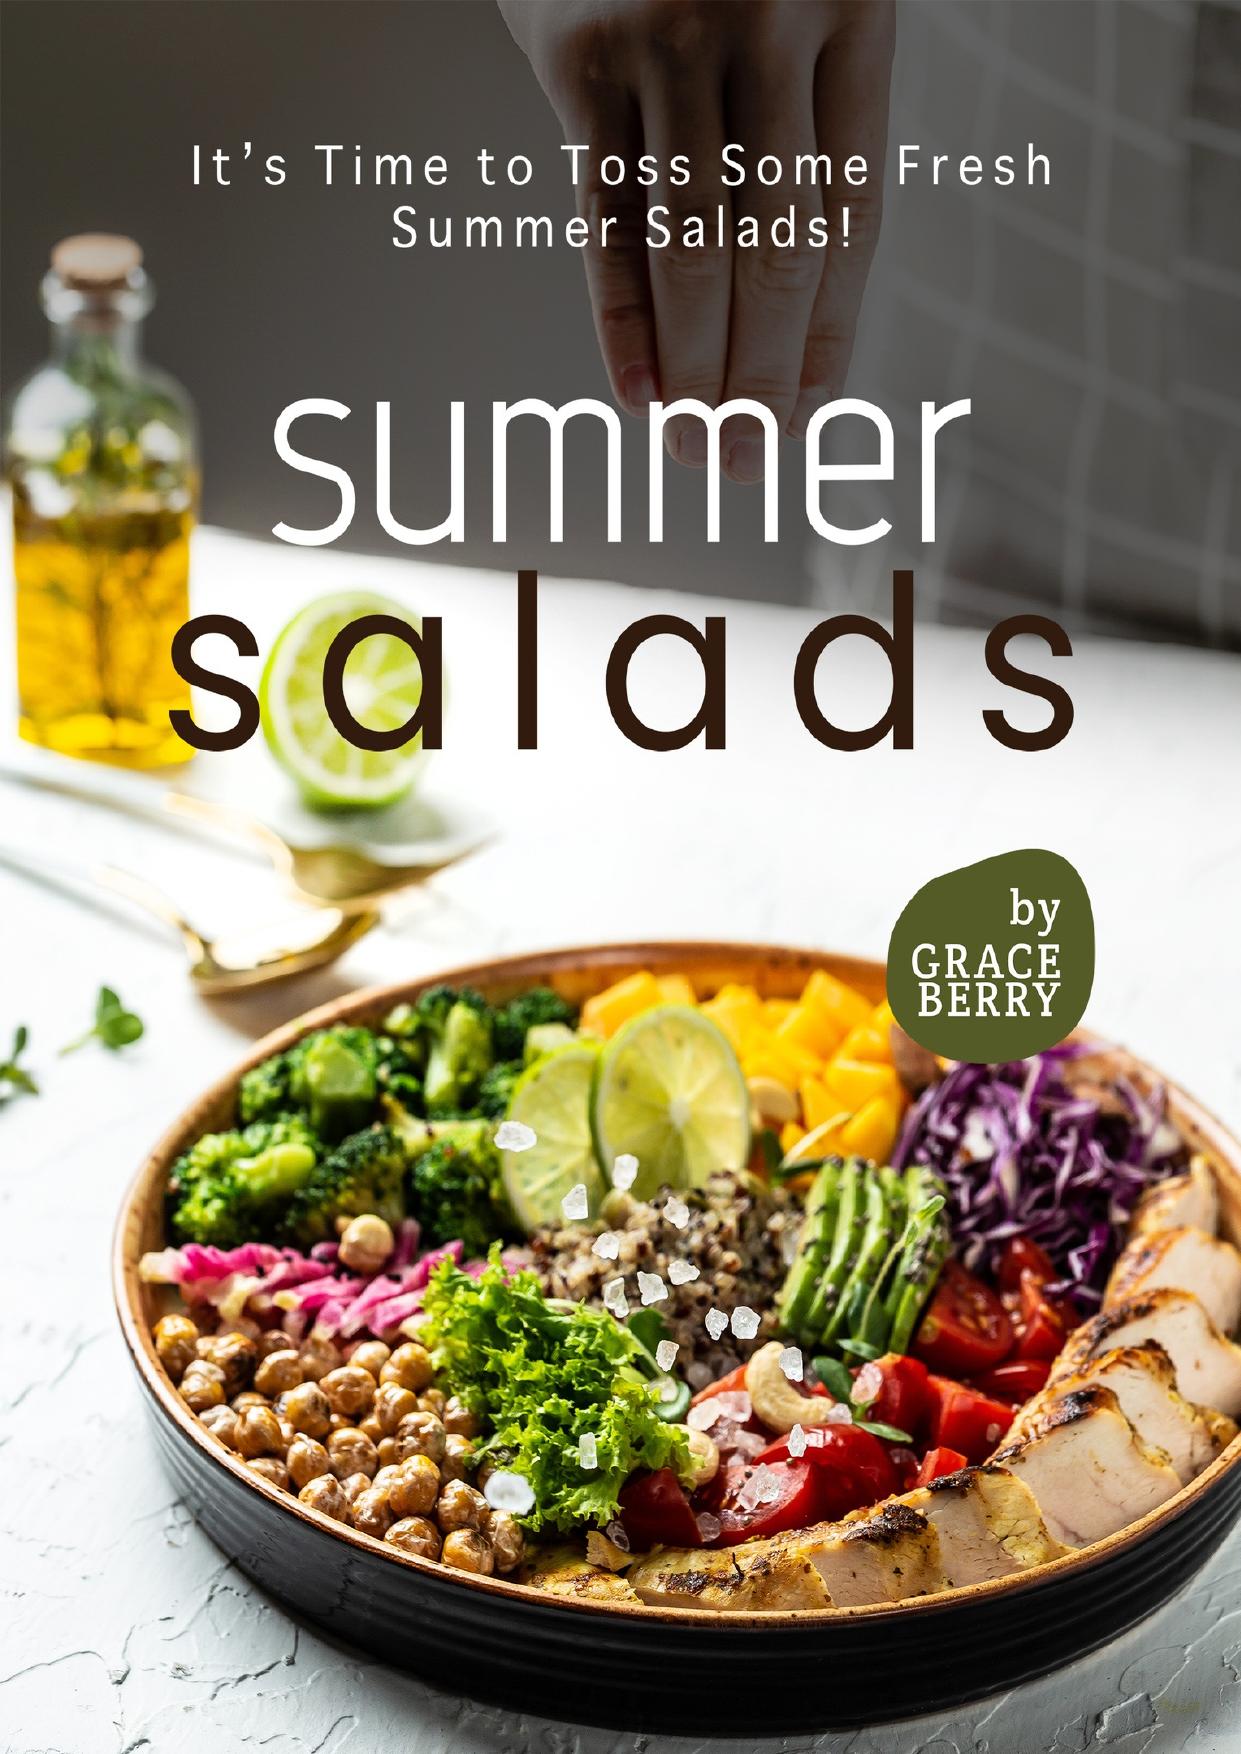 Summer Salads: It's Time to Toss Some Fresh Summer Salads! by Berry Grace